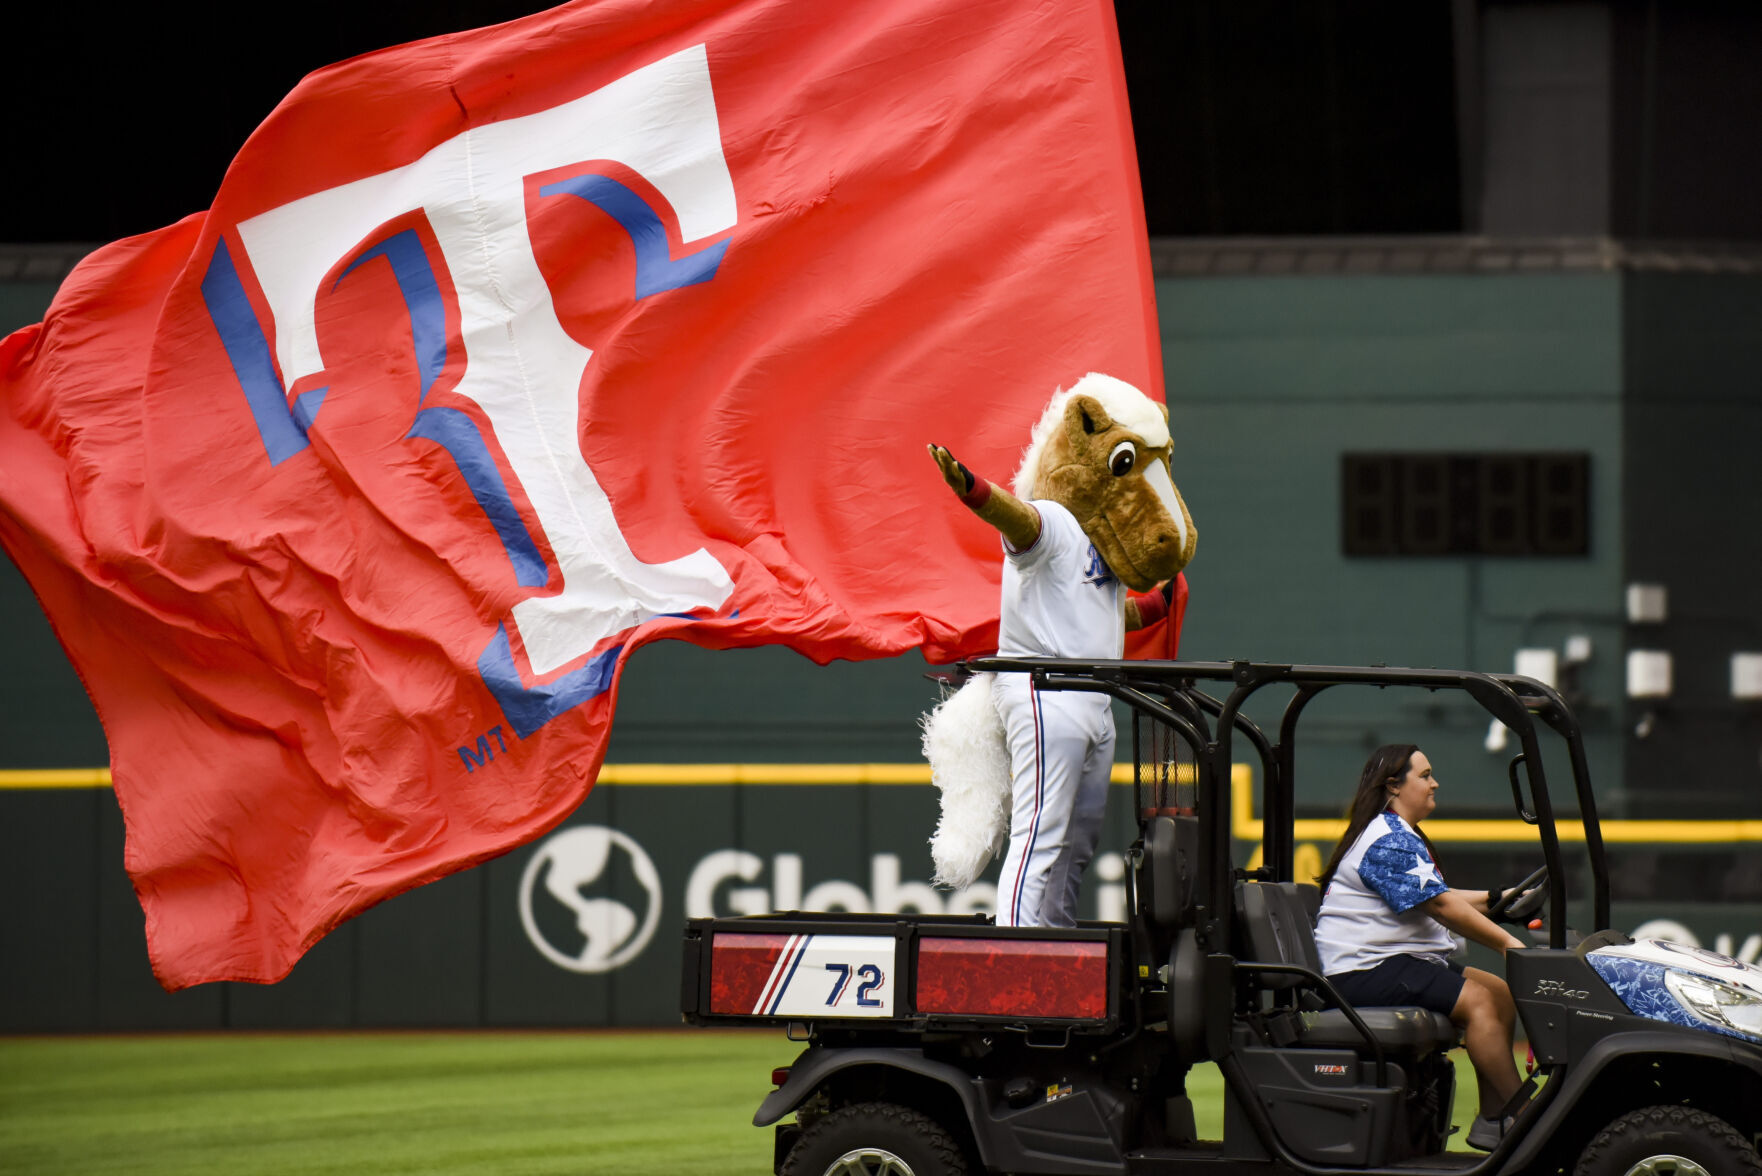 Why are the Texas Rangers the only MLB team without a Pride Night? pic